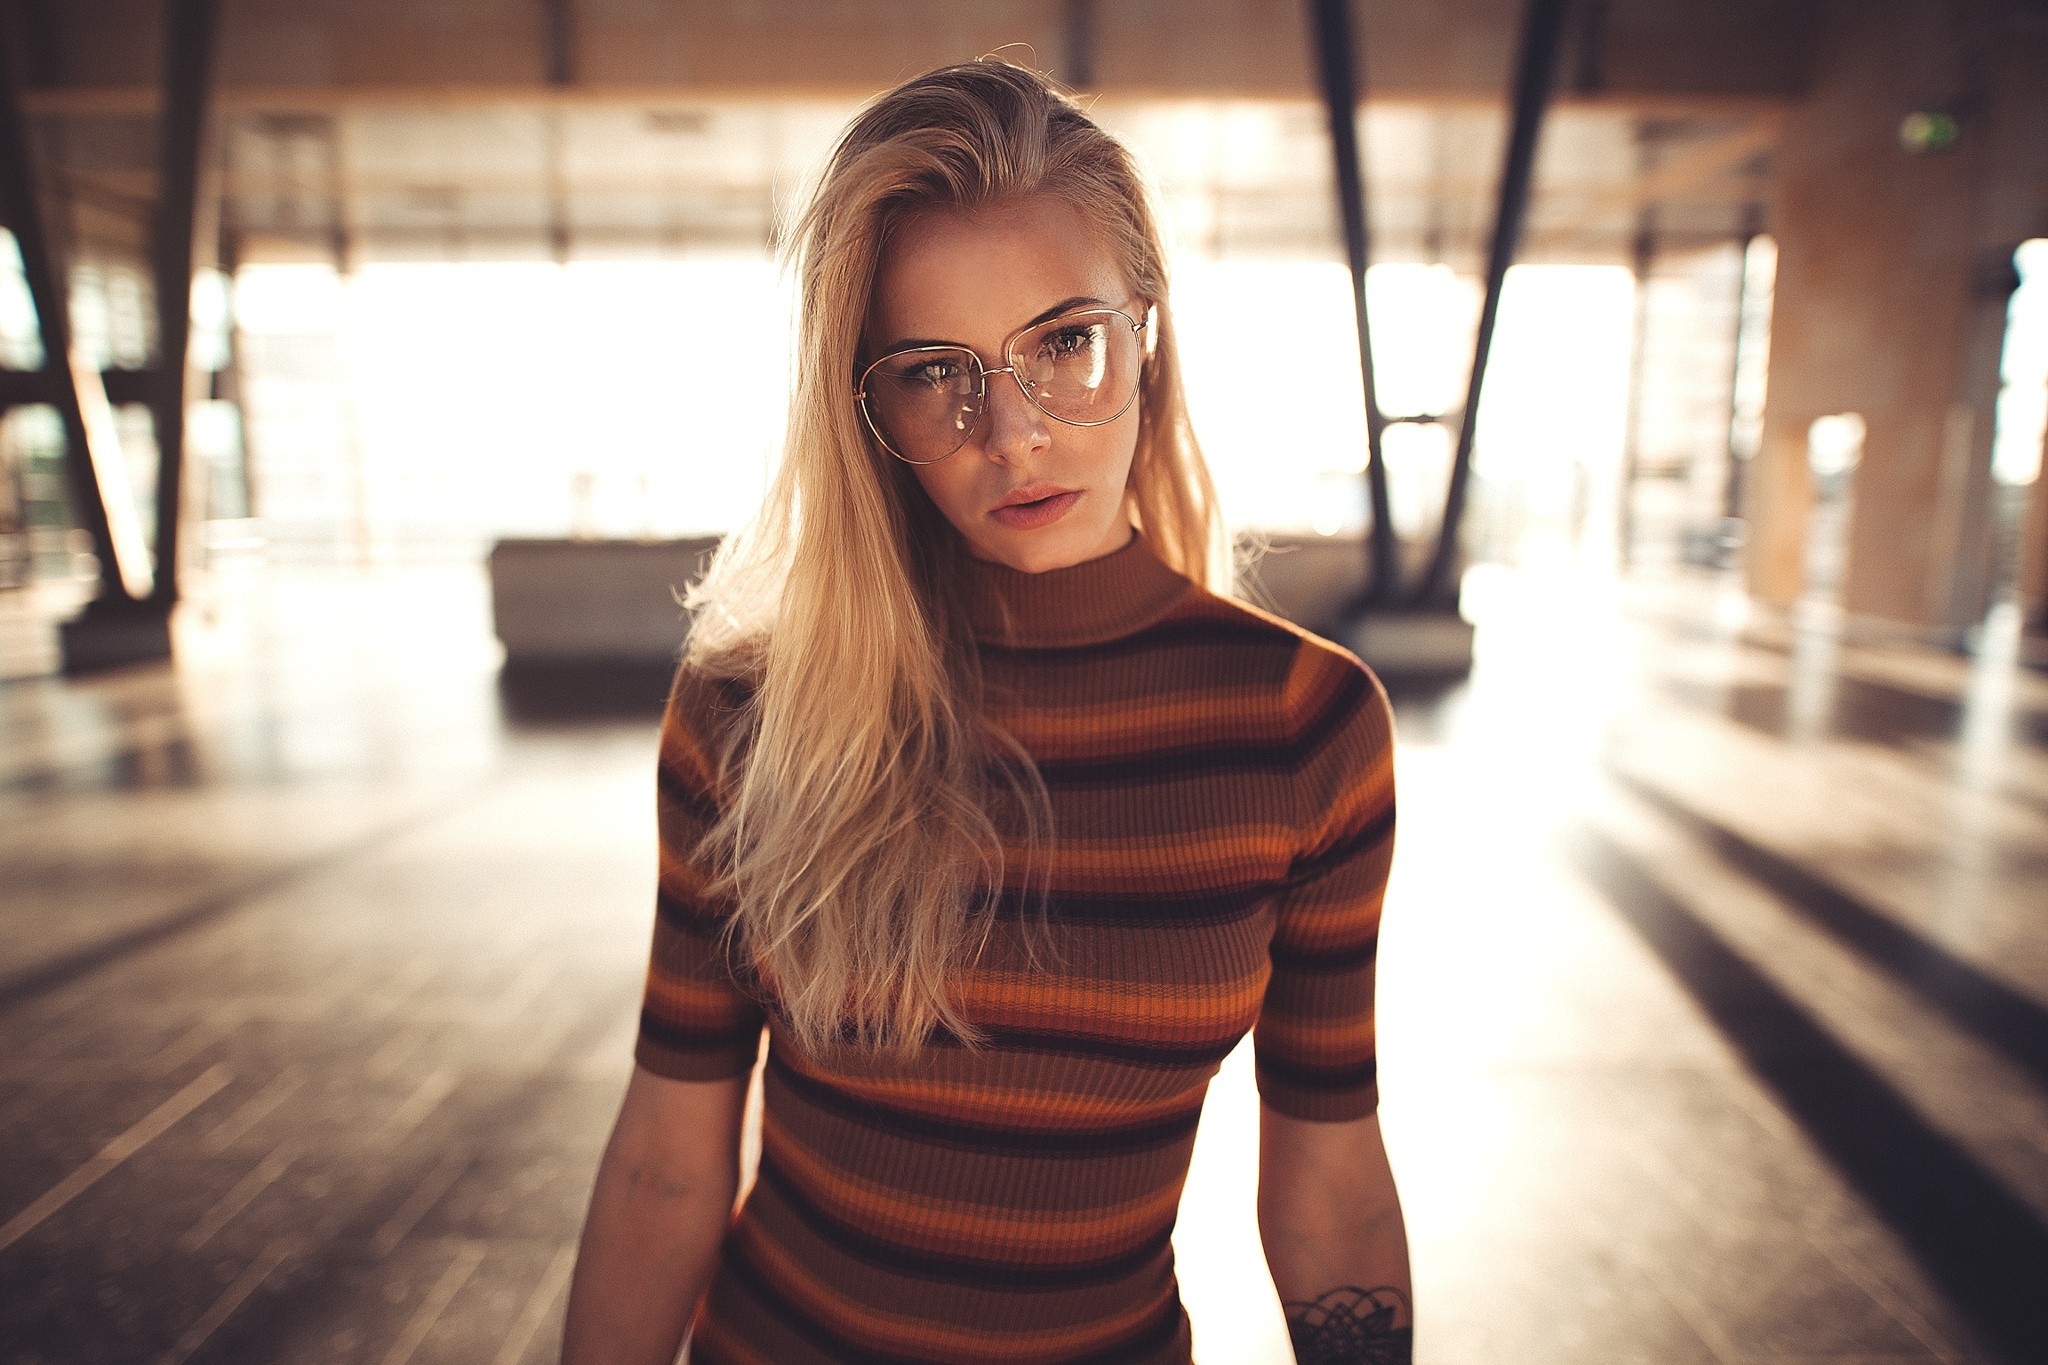 People 2048x1365 women face portrait sunlight women with glasses glasses blonde Sebastian Heberlein tattoo looking at viewer women indoors indoors striped clothing inked girls model